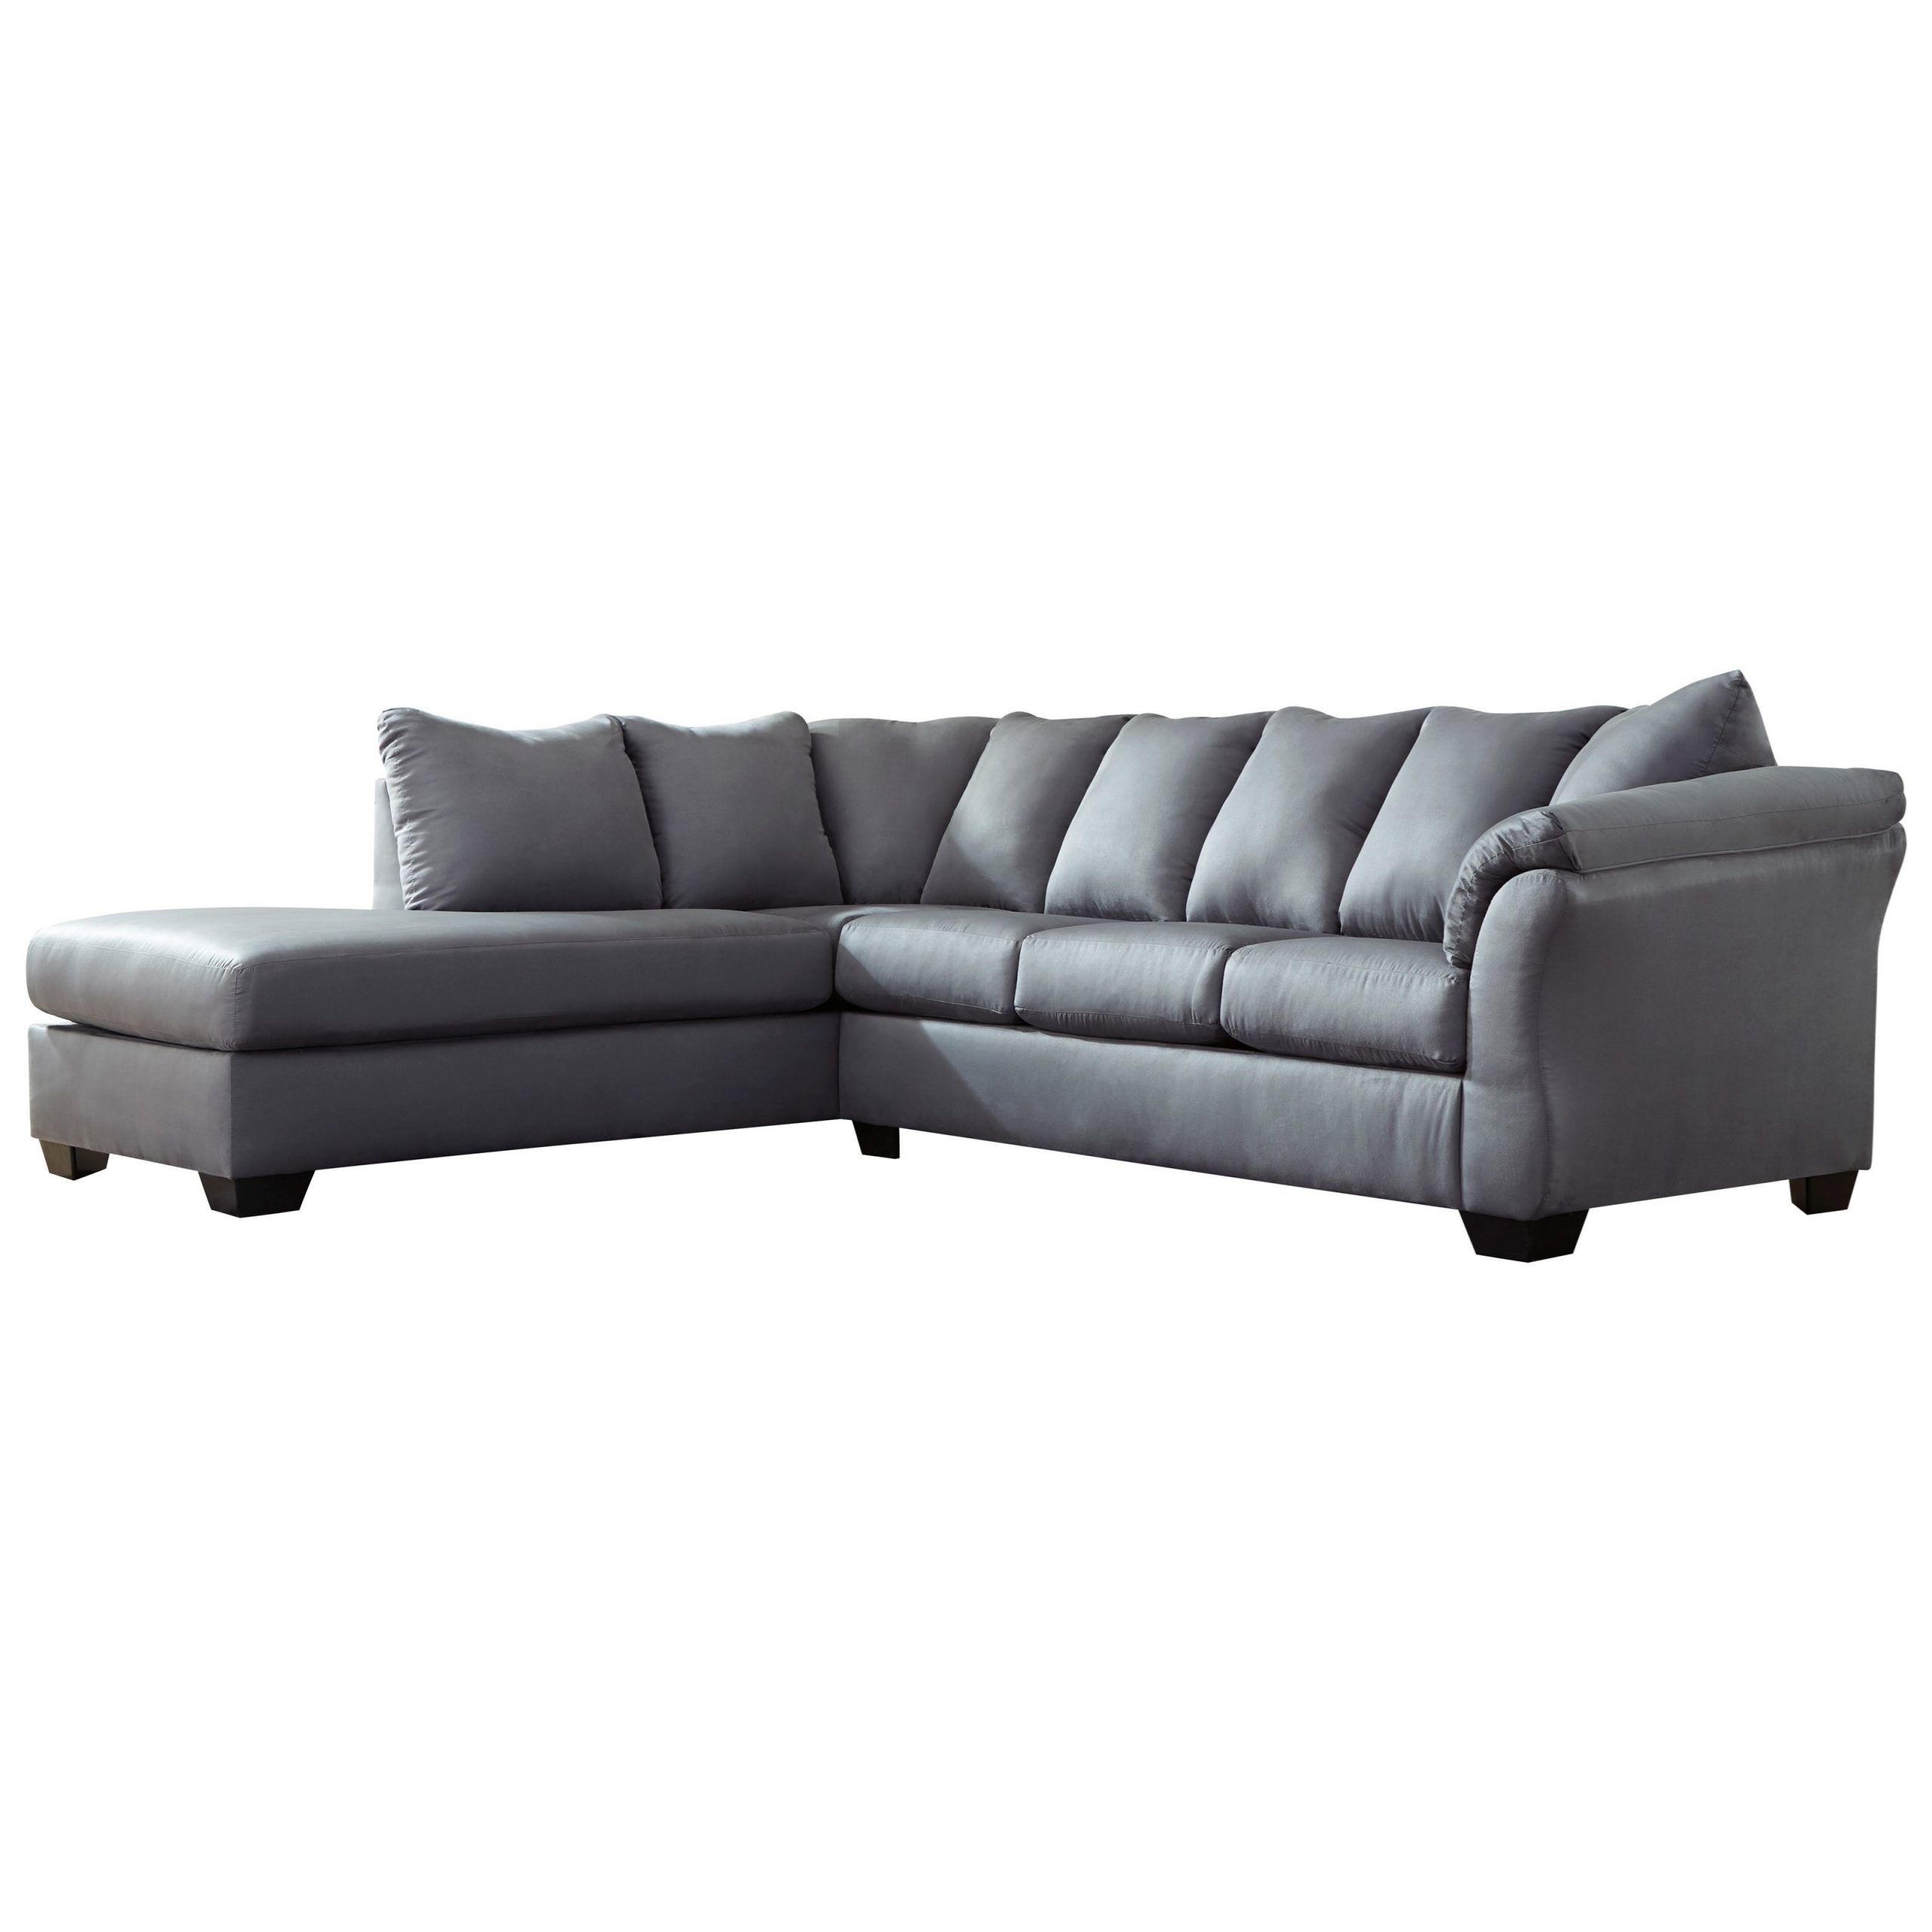 Signature Designashley Darcy – Steel Contemporary 2 Intended For 2Pc Burland Contemporary Chaise Sectional Sofas (View 4 of 15)